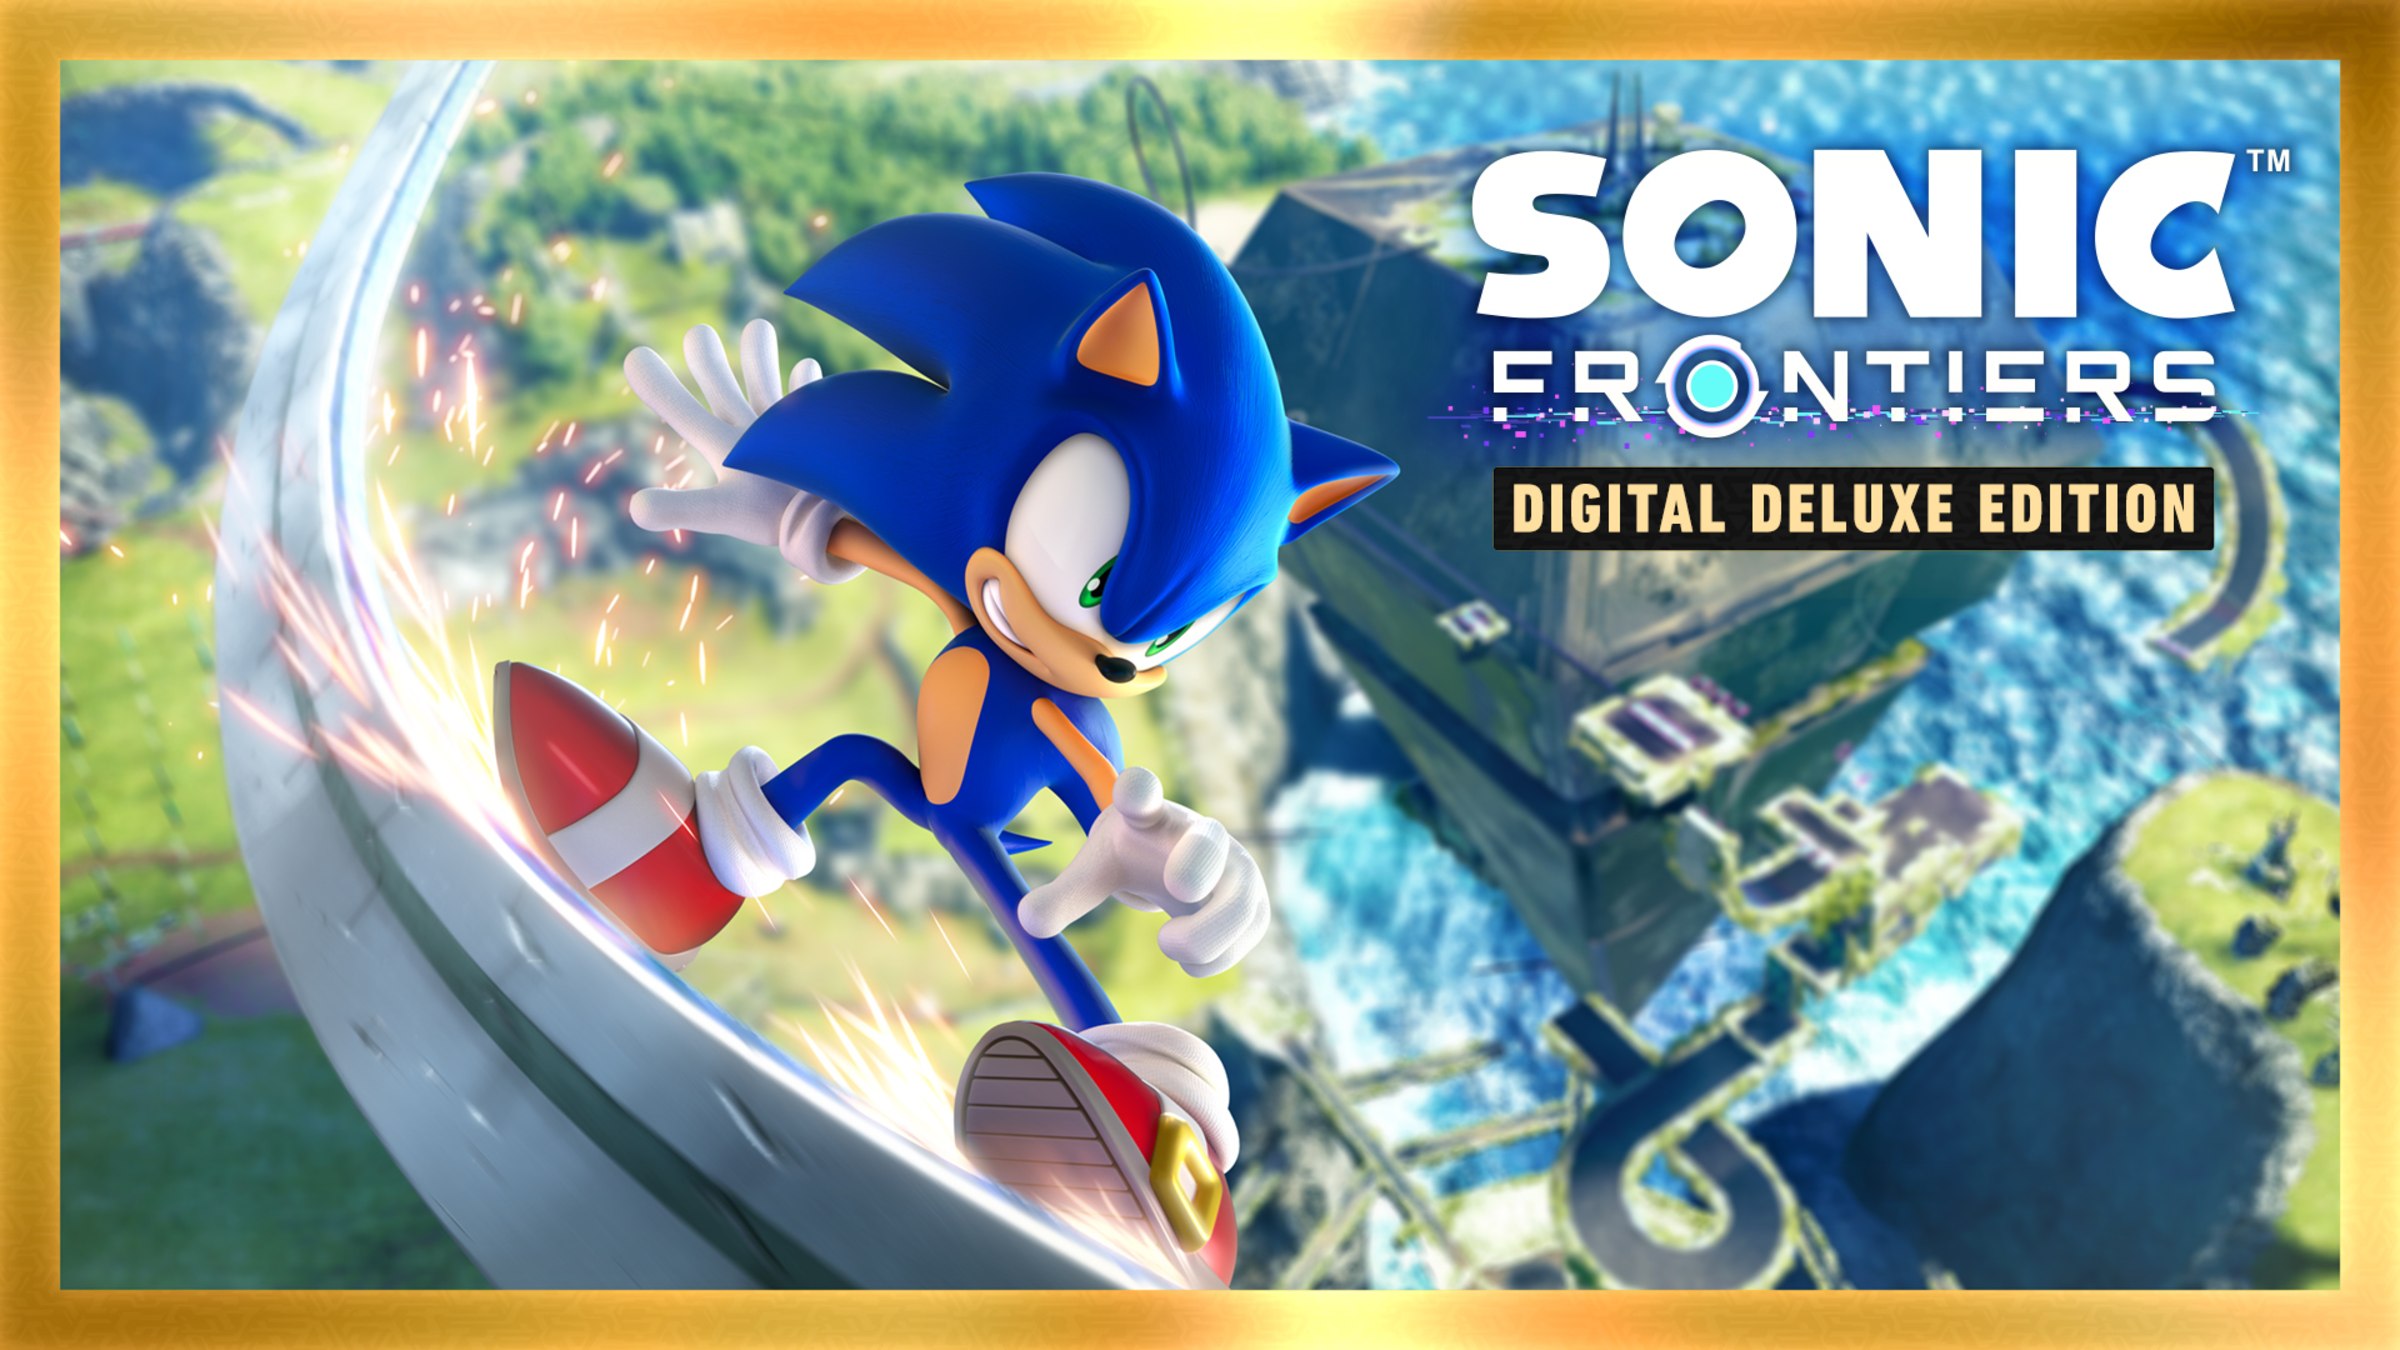 SUPER SONIC for Nintendo Switch - Nintendo Official Site